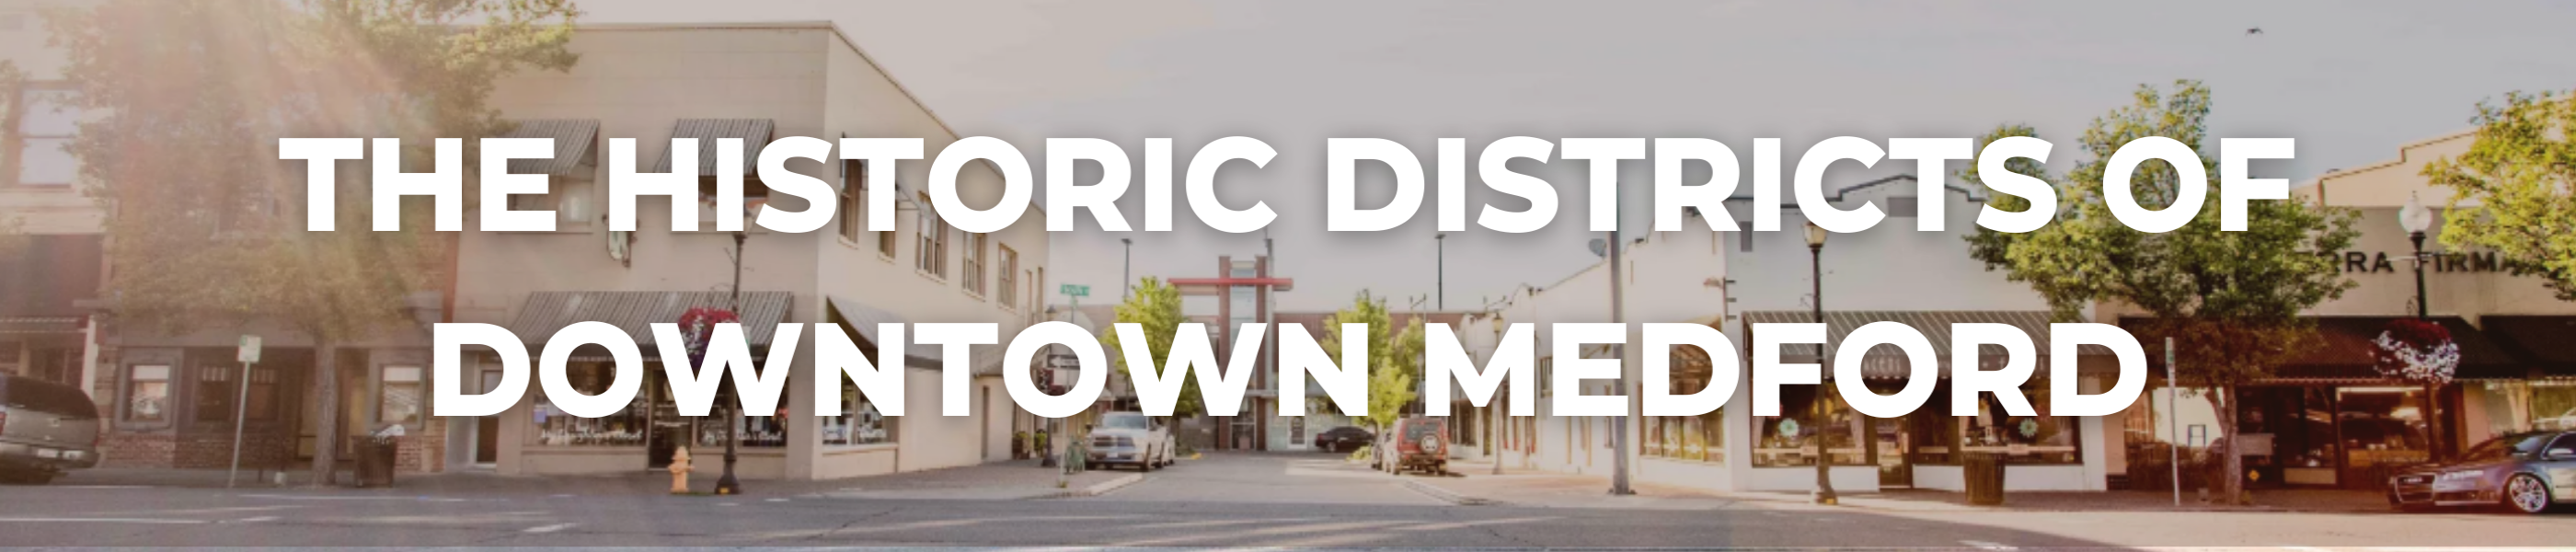 The Historic Districts of Downtown Medford